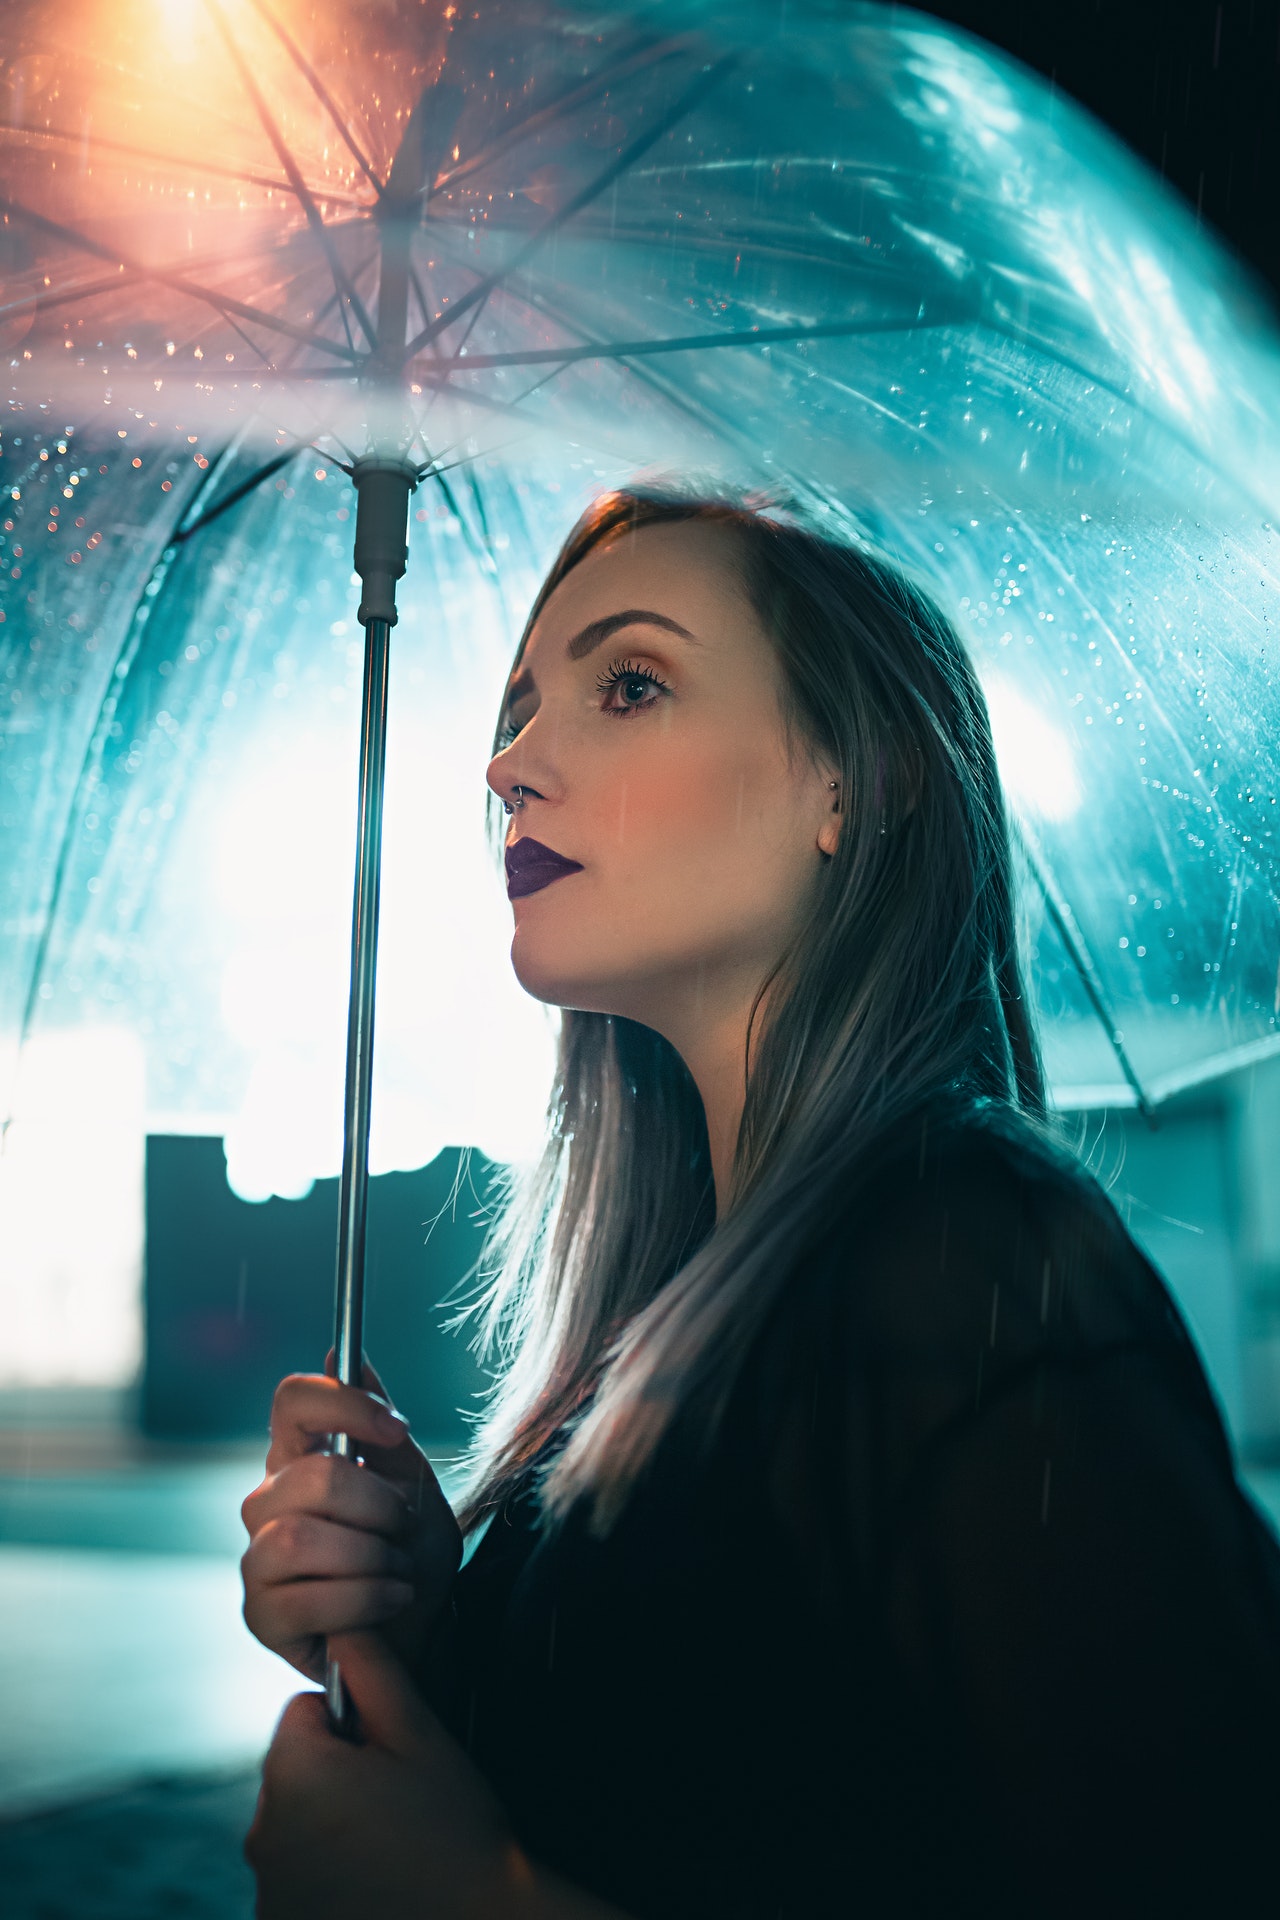 Photo by Thiago Schlemper: https://www.pexels.com/photo/young-woman-under-transparent-umbrella-on-street-7033246/